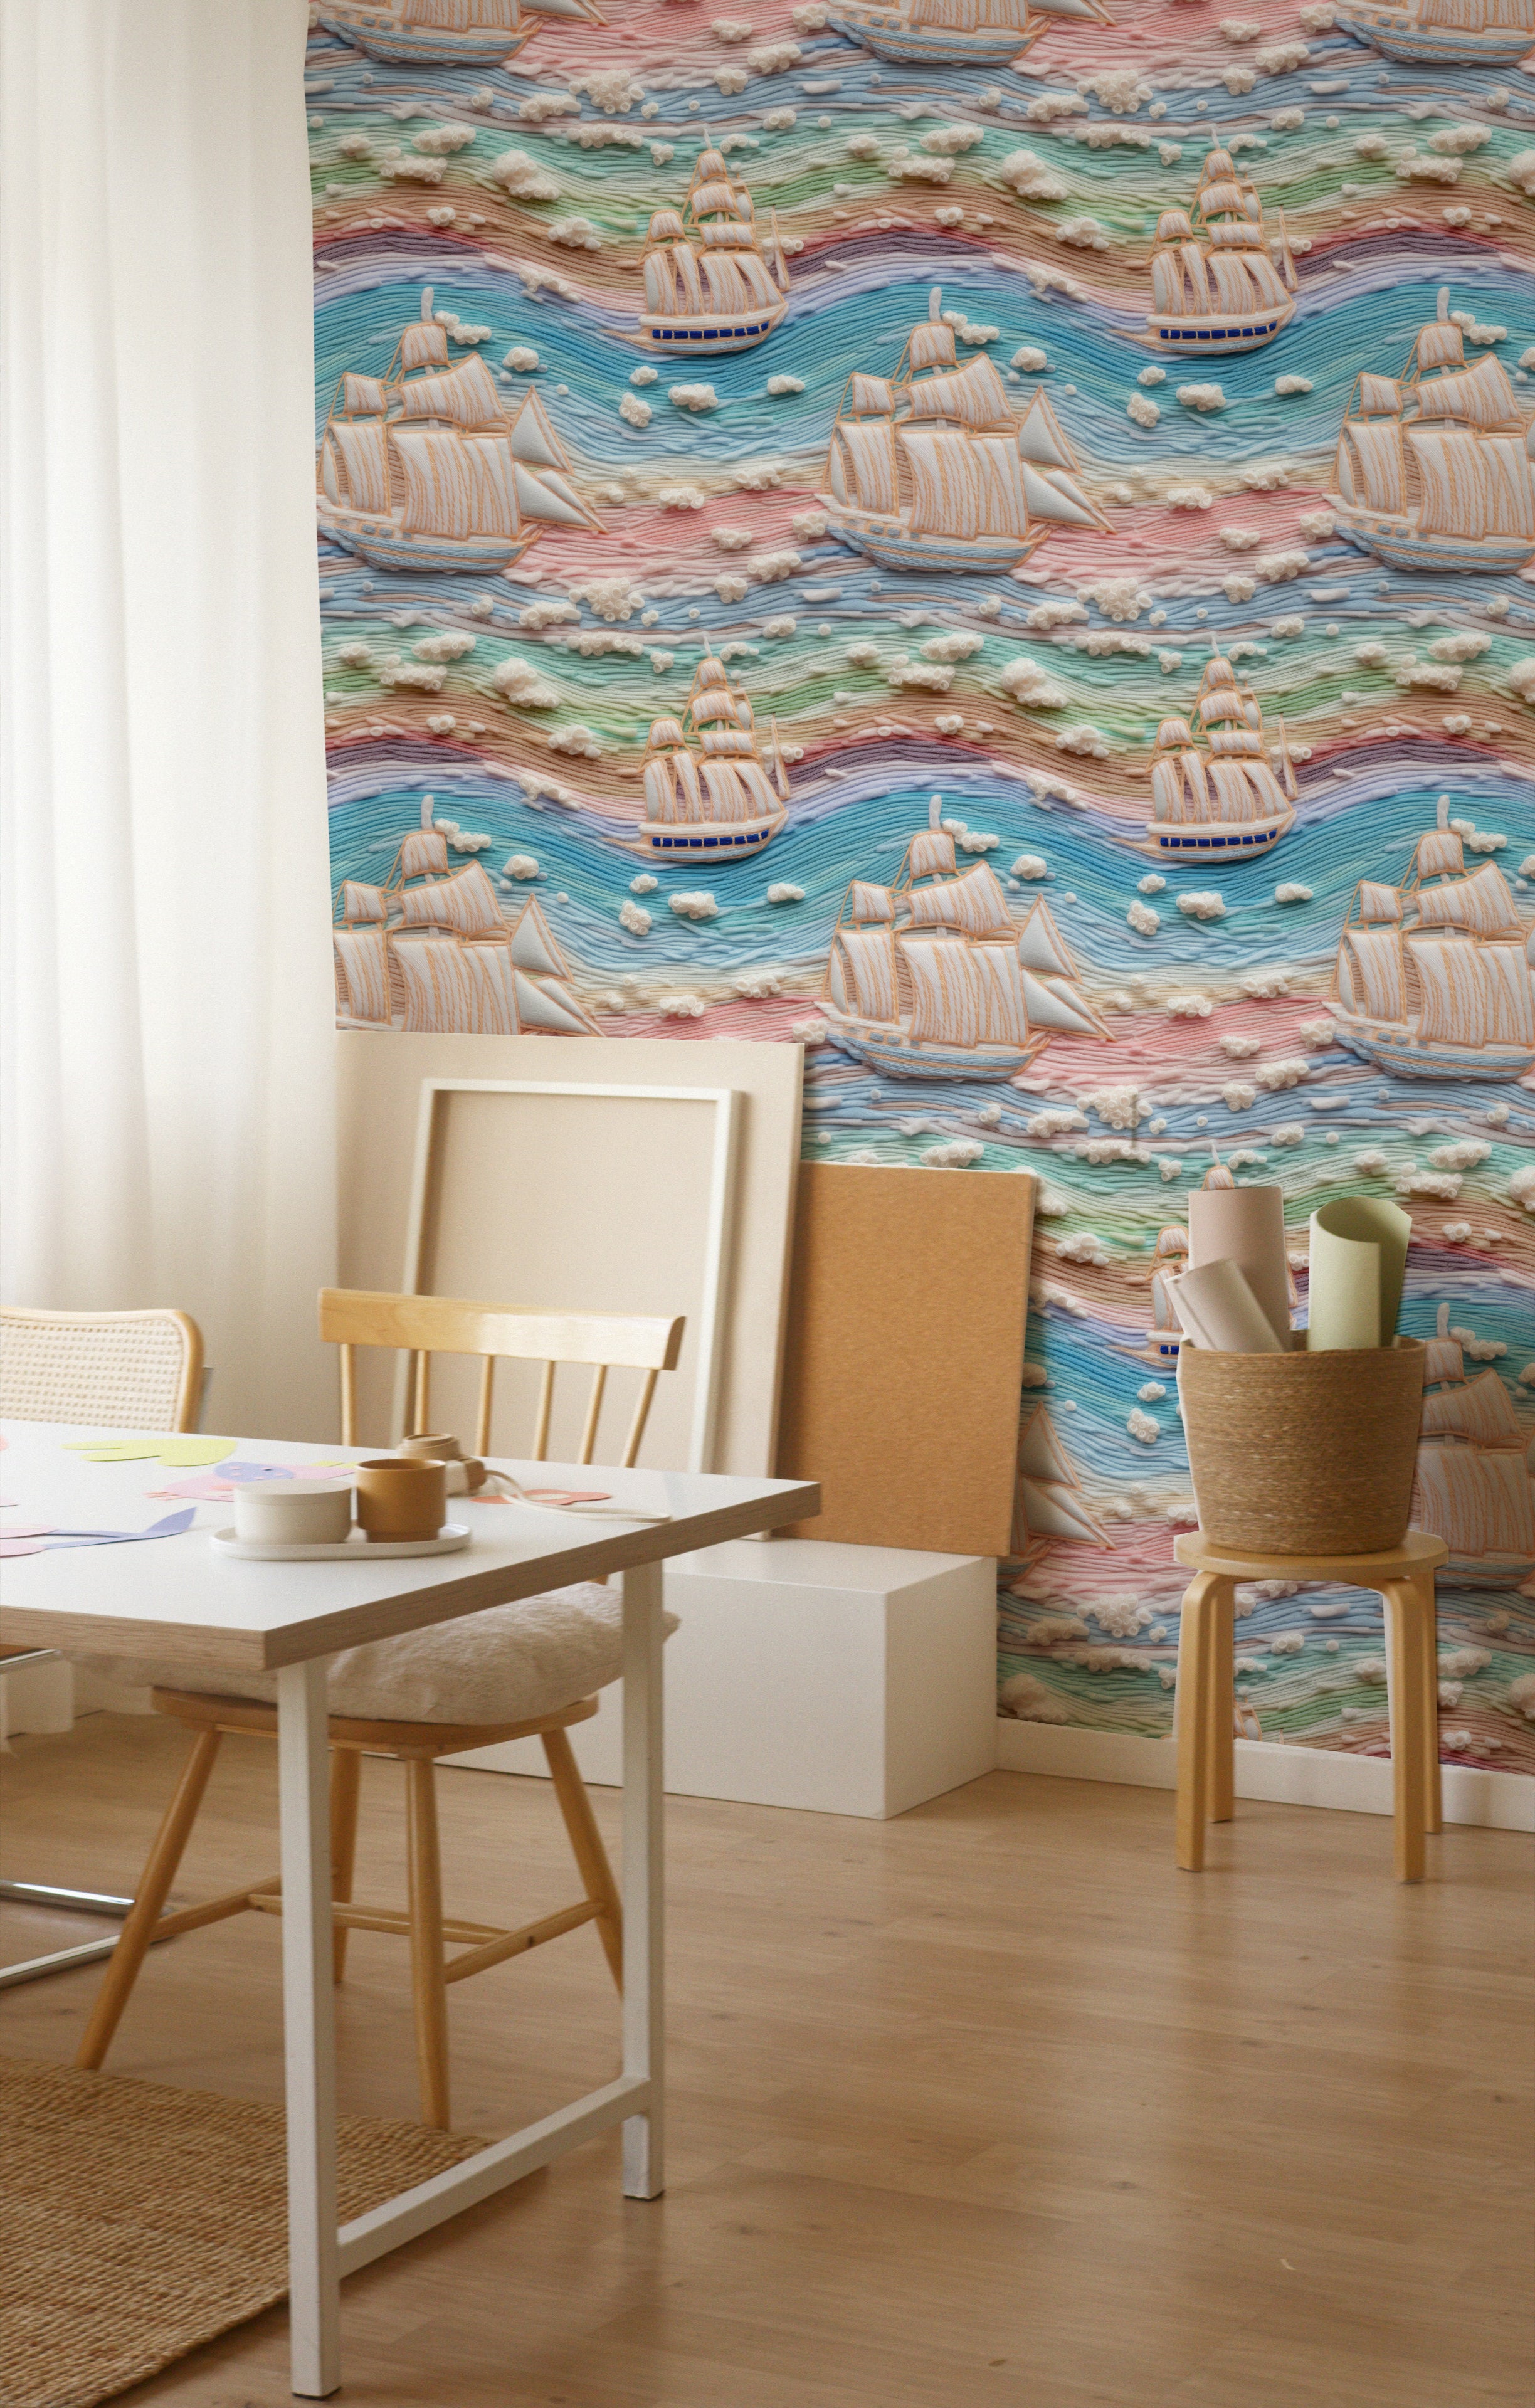 A creative workspace enhanced by the Sunset Sail Wallpaper, which brings a dynamic and colorful seascape to the environment. The setting includes a simple wooden desk and chair, highlighting the wallpaper's ability to inspire and brighten any space.